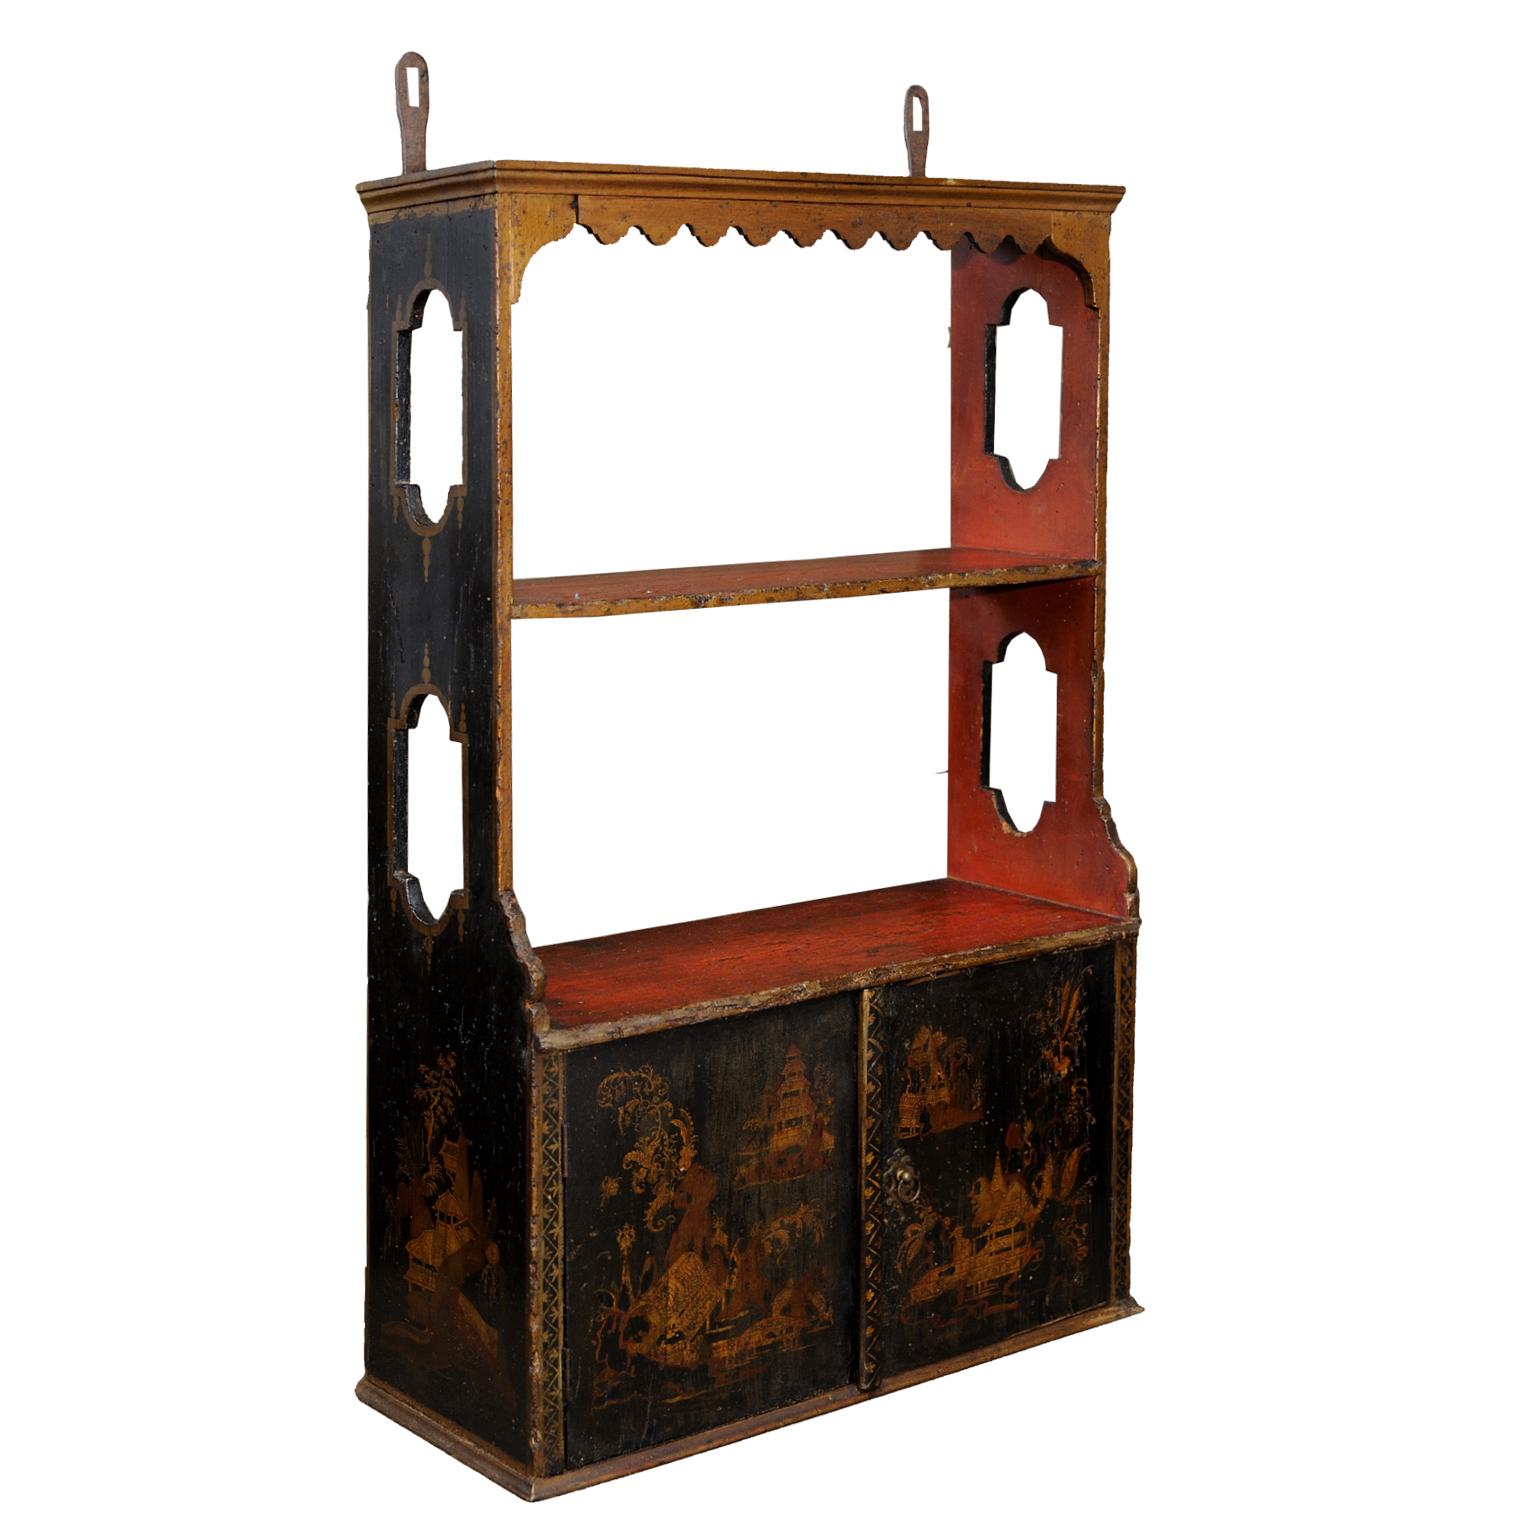 Set of French Louis XVI Chinoiserie Lacquered Hanging Shelves, circa 1780 For Sale